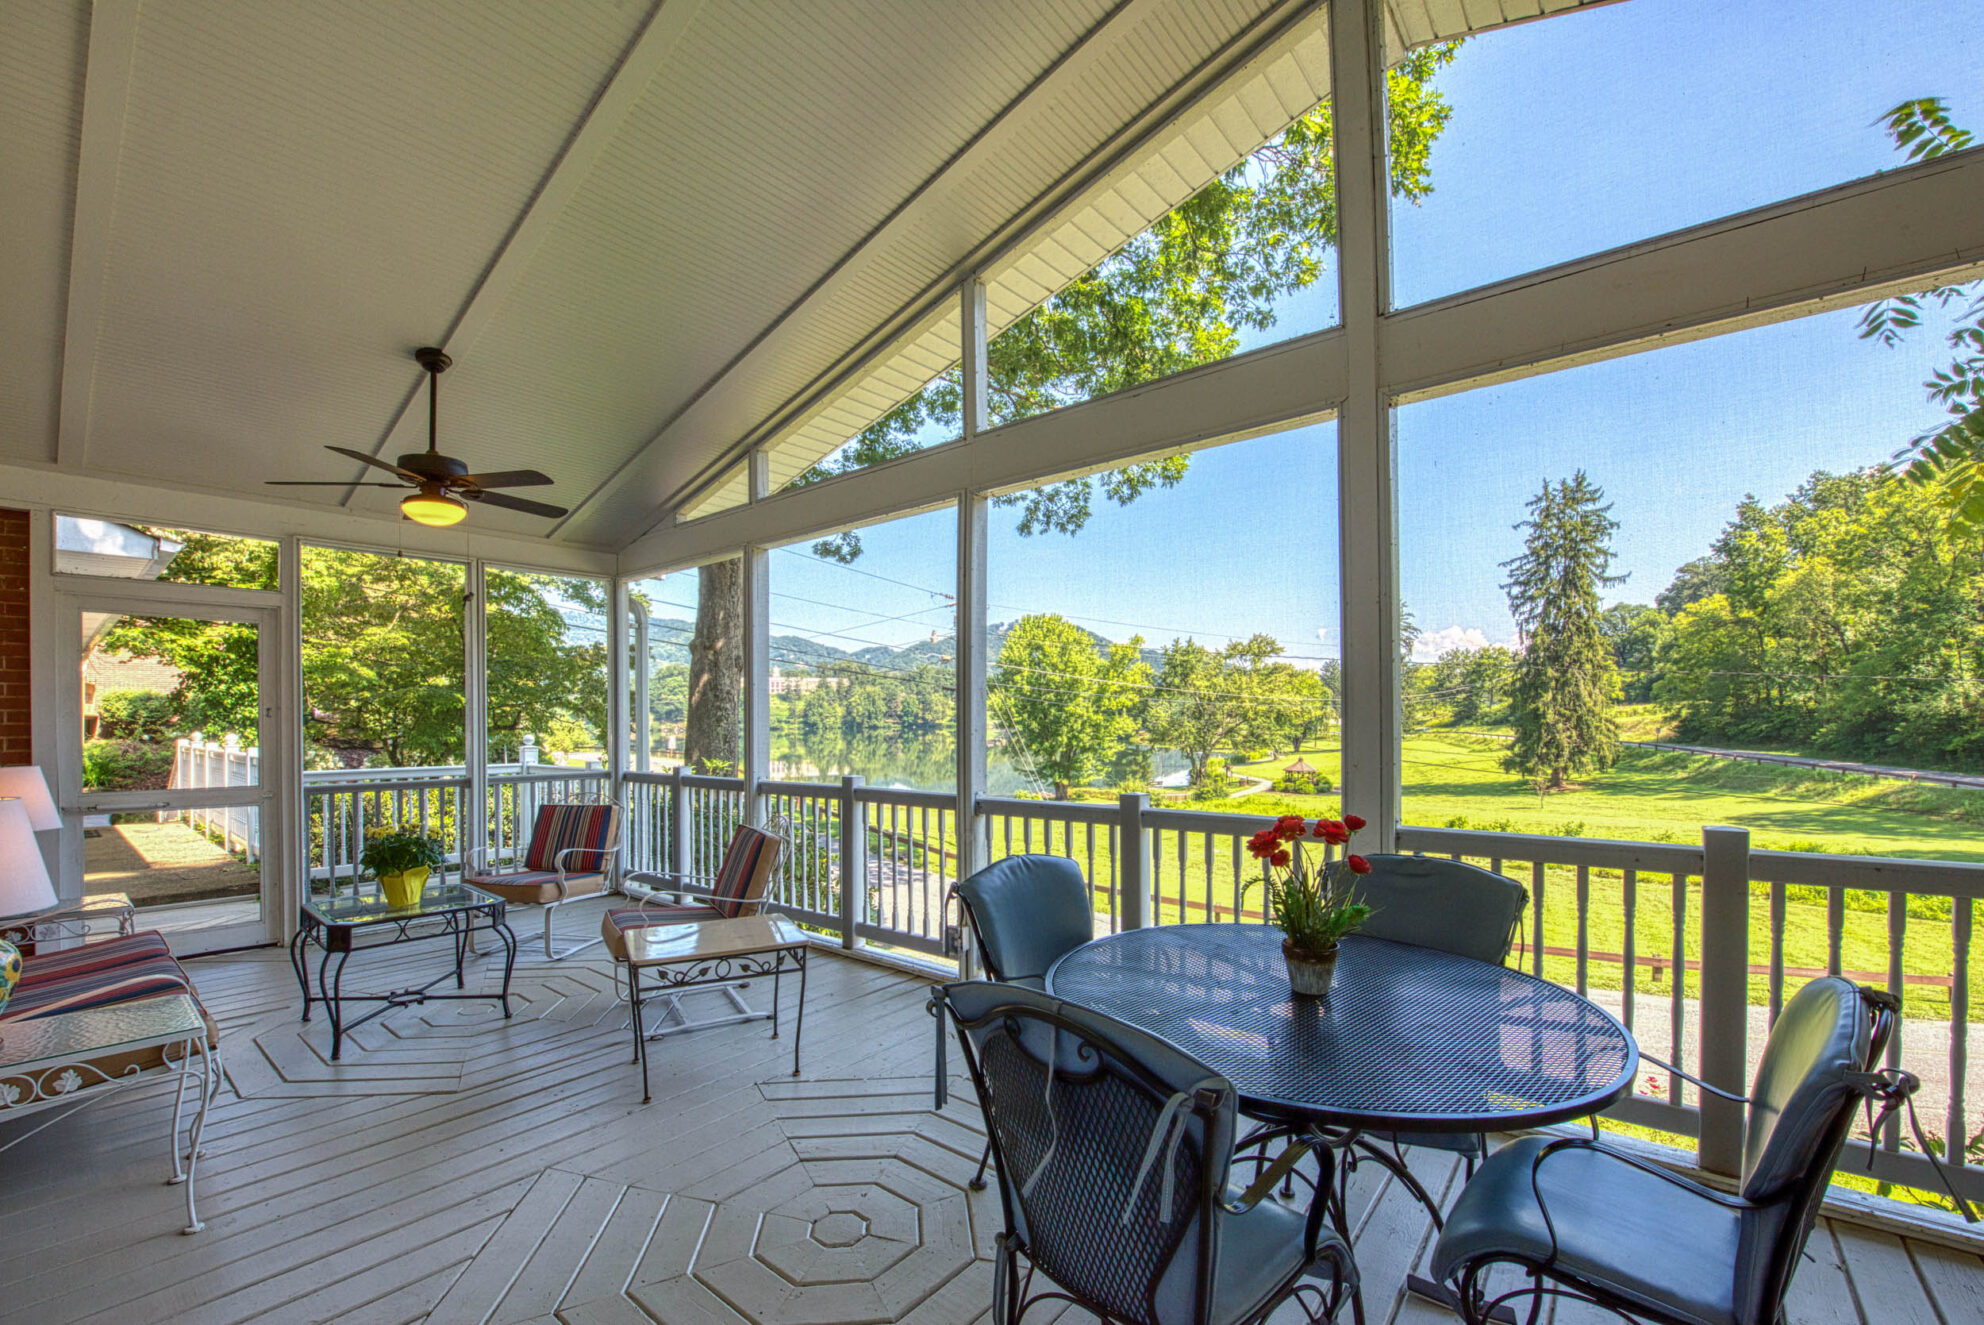 Lake Junaluska vacation rental screen porch with view of the golf course